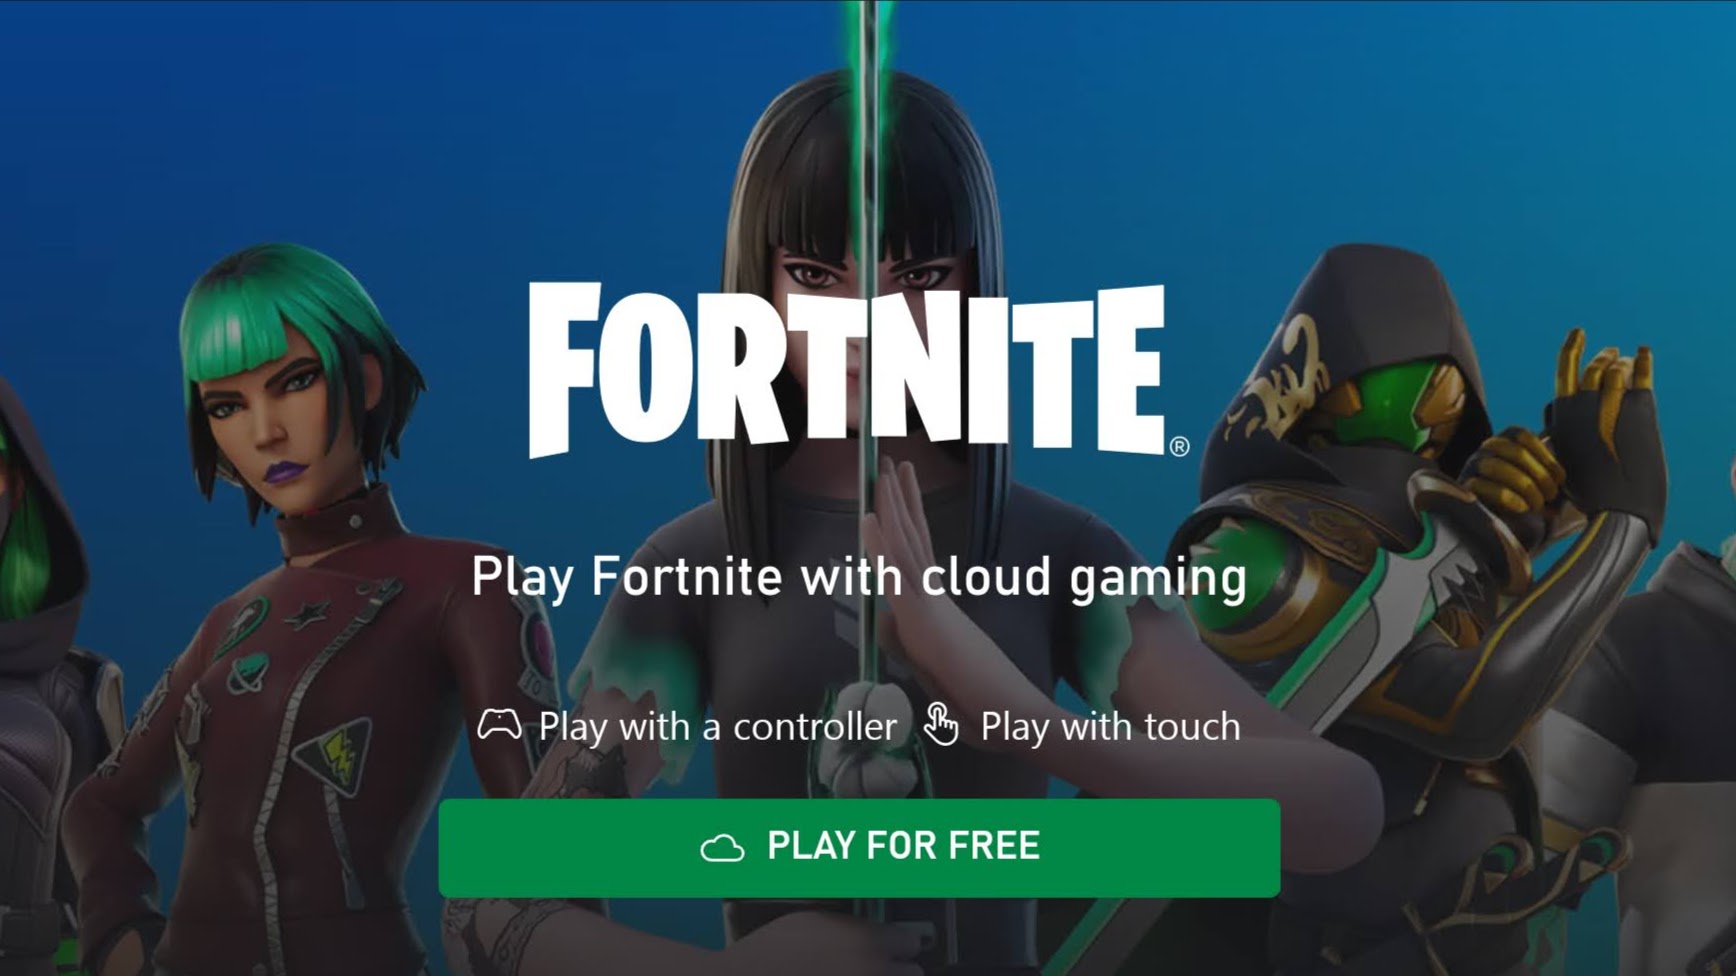 A screenshot of a Fortnite splash screen with a button below that says 